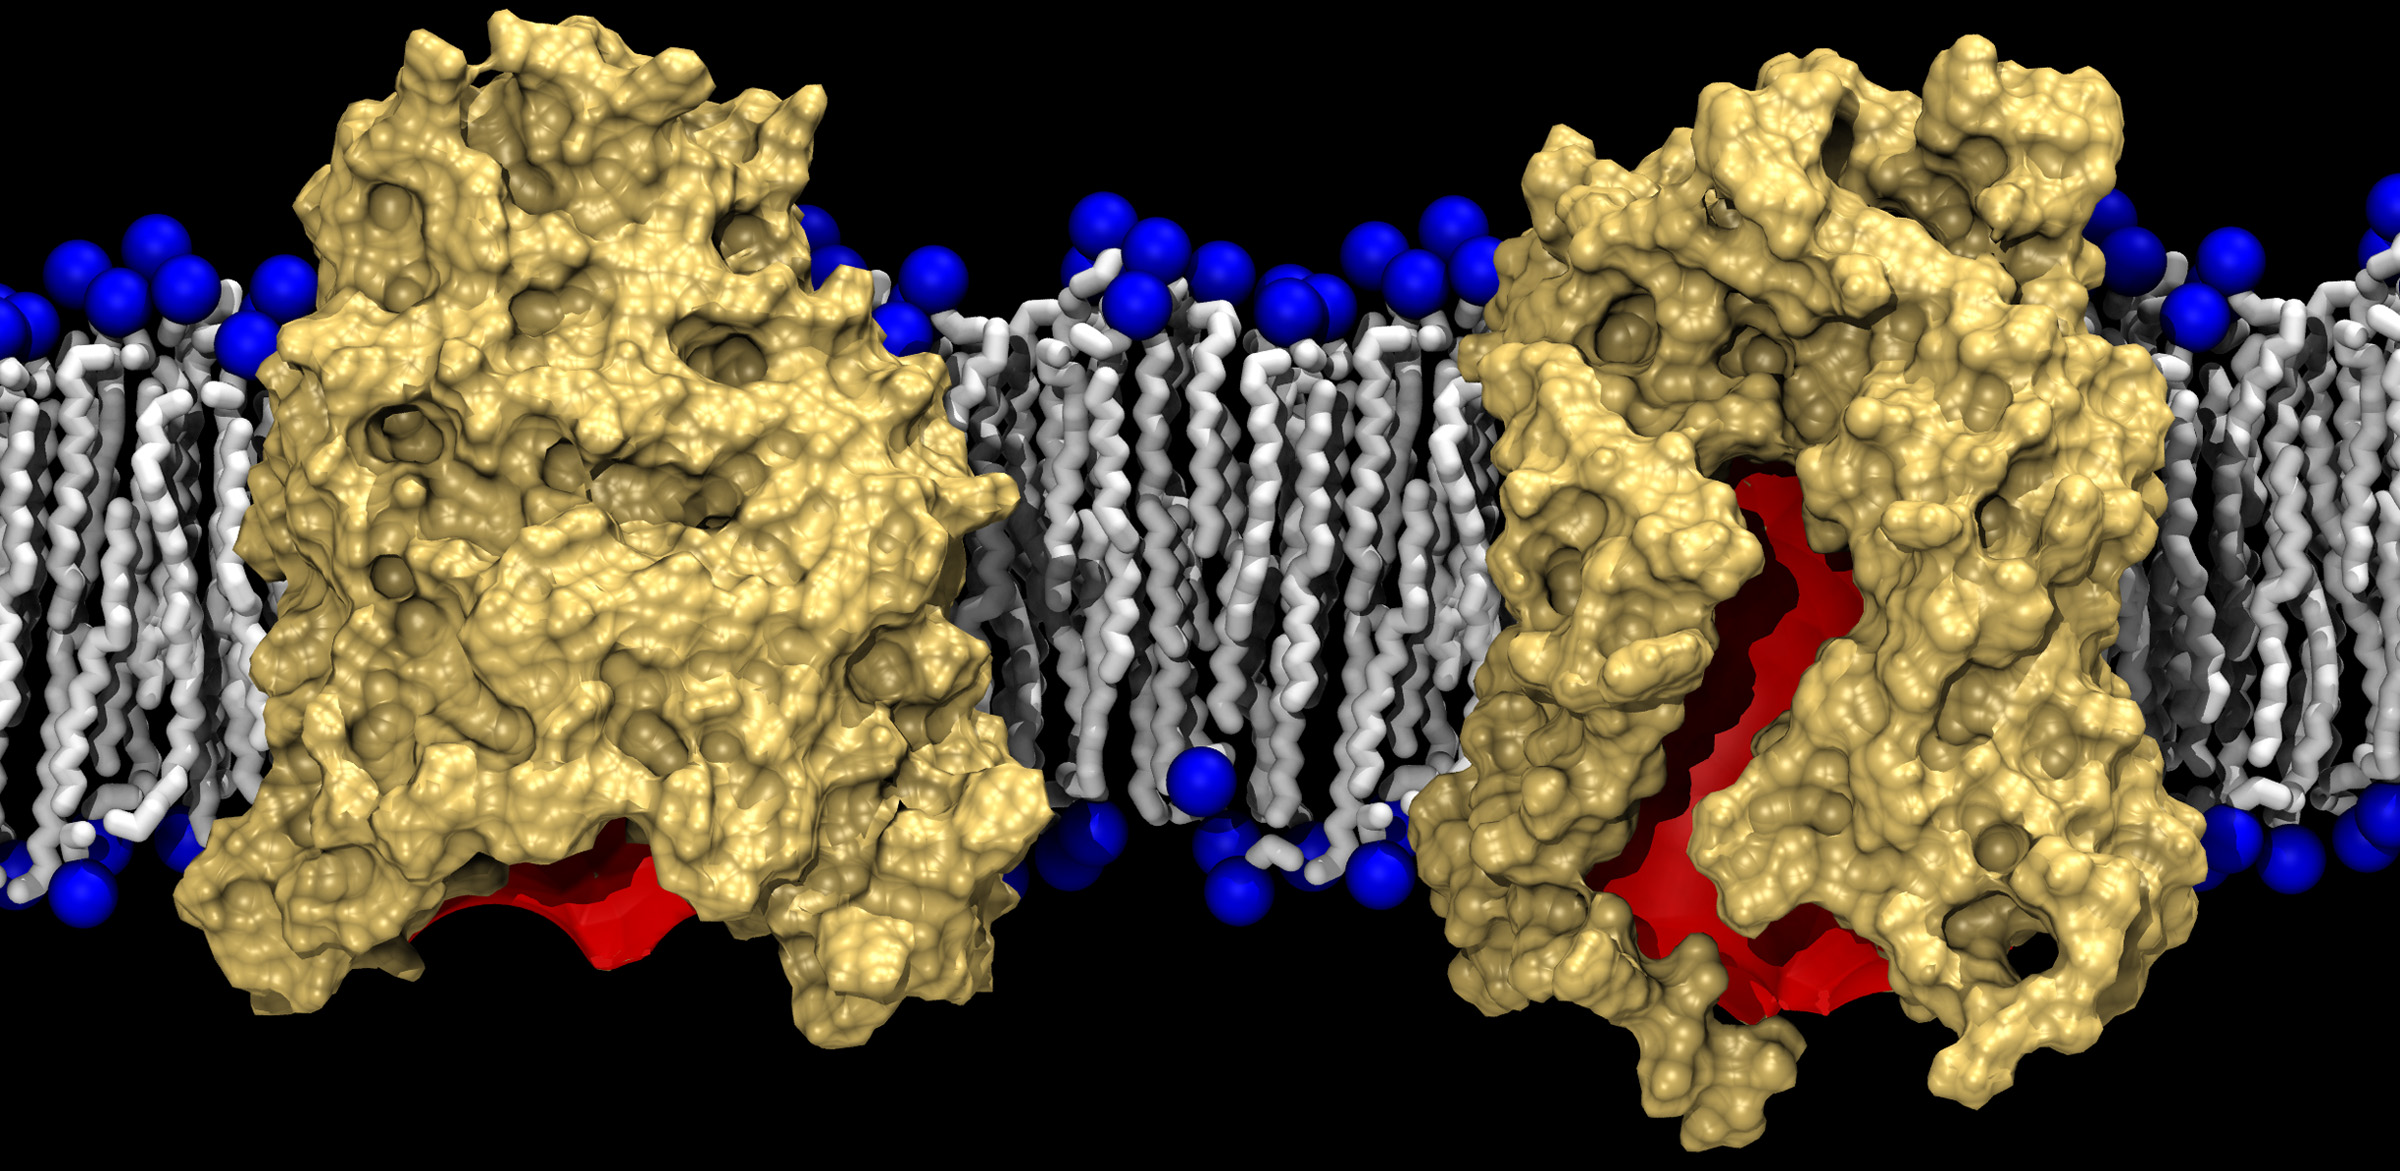 This graphic shows two conformations of BamA (gold) against a lipid bilayer background. The left side shows the crystallized form of BamA, almost completely closed, while the right shows a laterally open state revealed by the simulations. The red color denotes the interior of the barrel. (Courtesy of J.C. Gumbart)